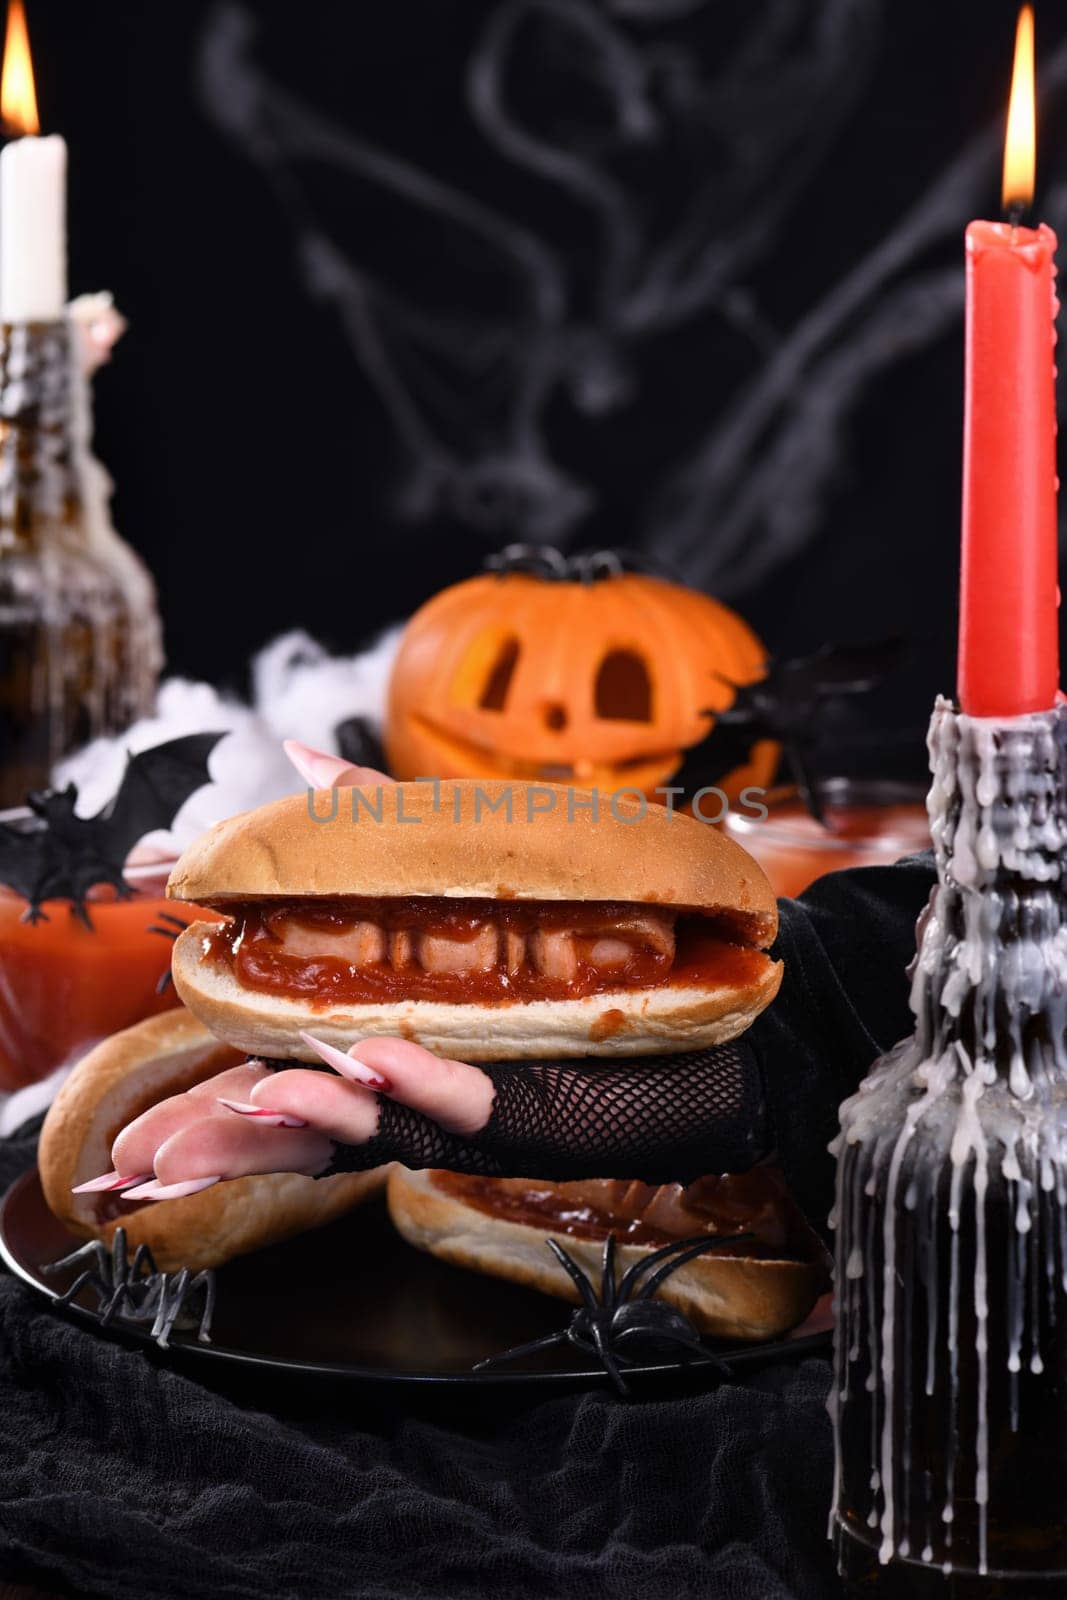  Hot dog Bloody fingers in the hands of a witch. Halloween appetizer